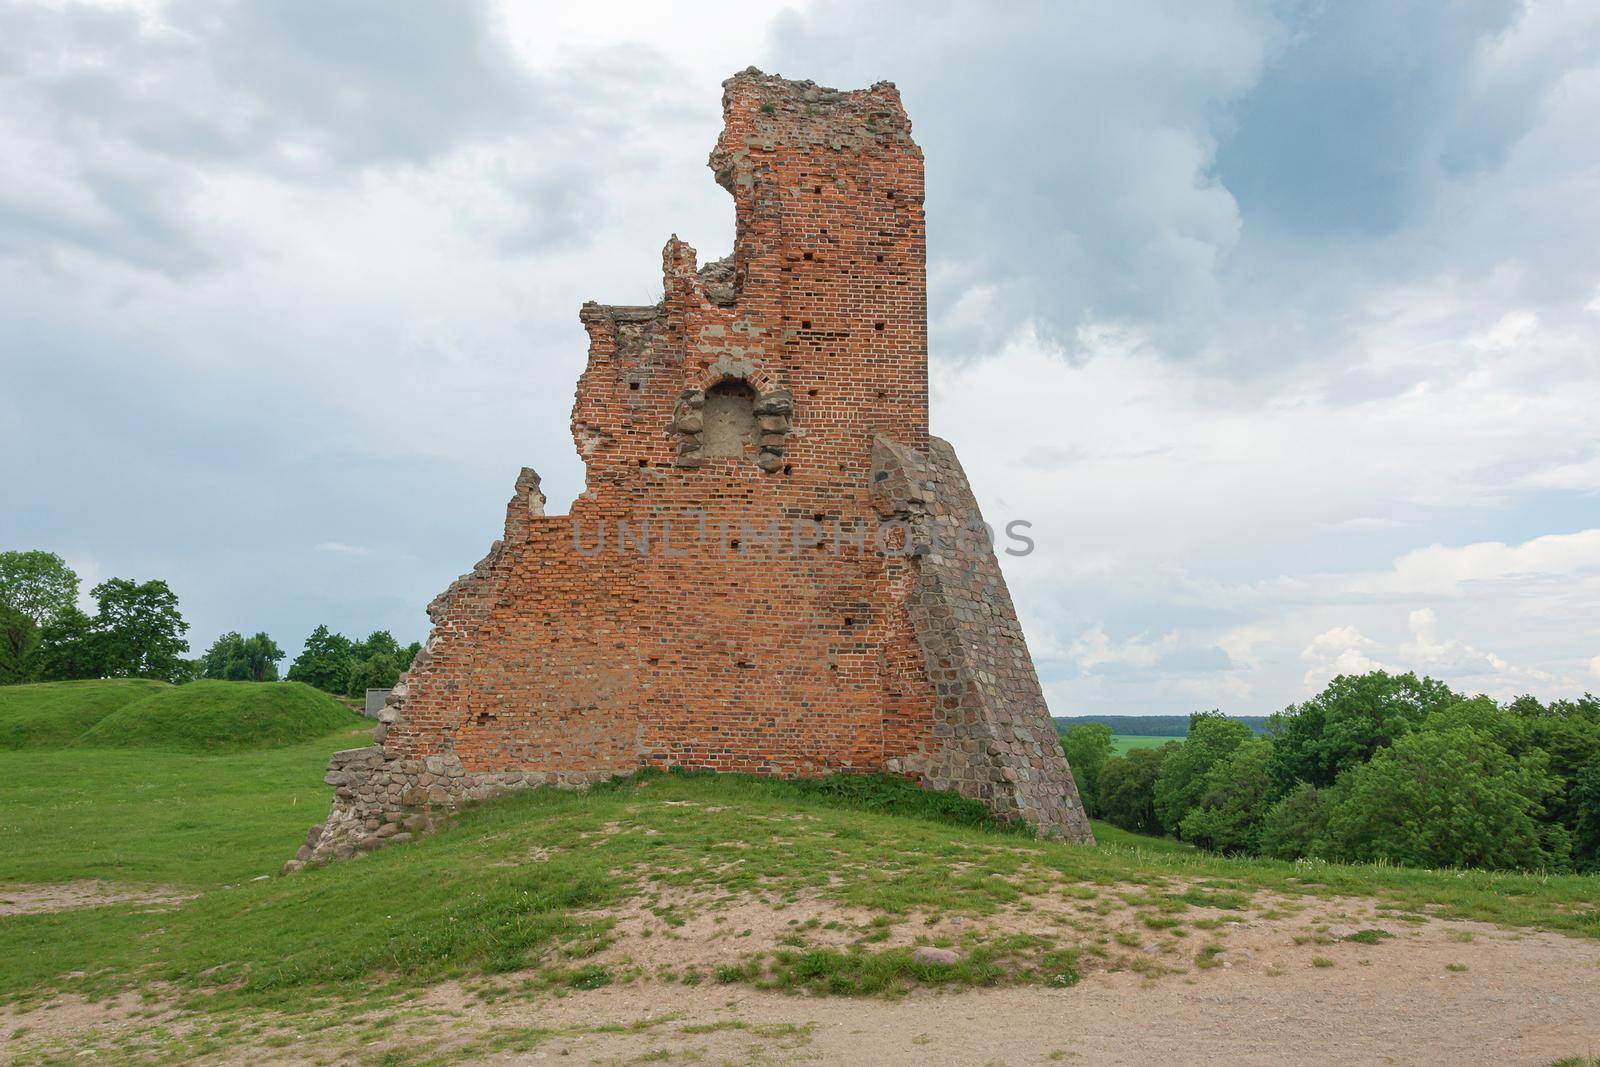 Remains of the ruins of an old fortress (Novogrudok, Belarus) by Grommik